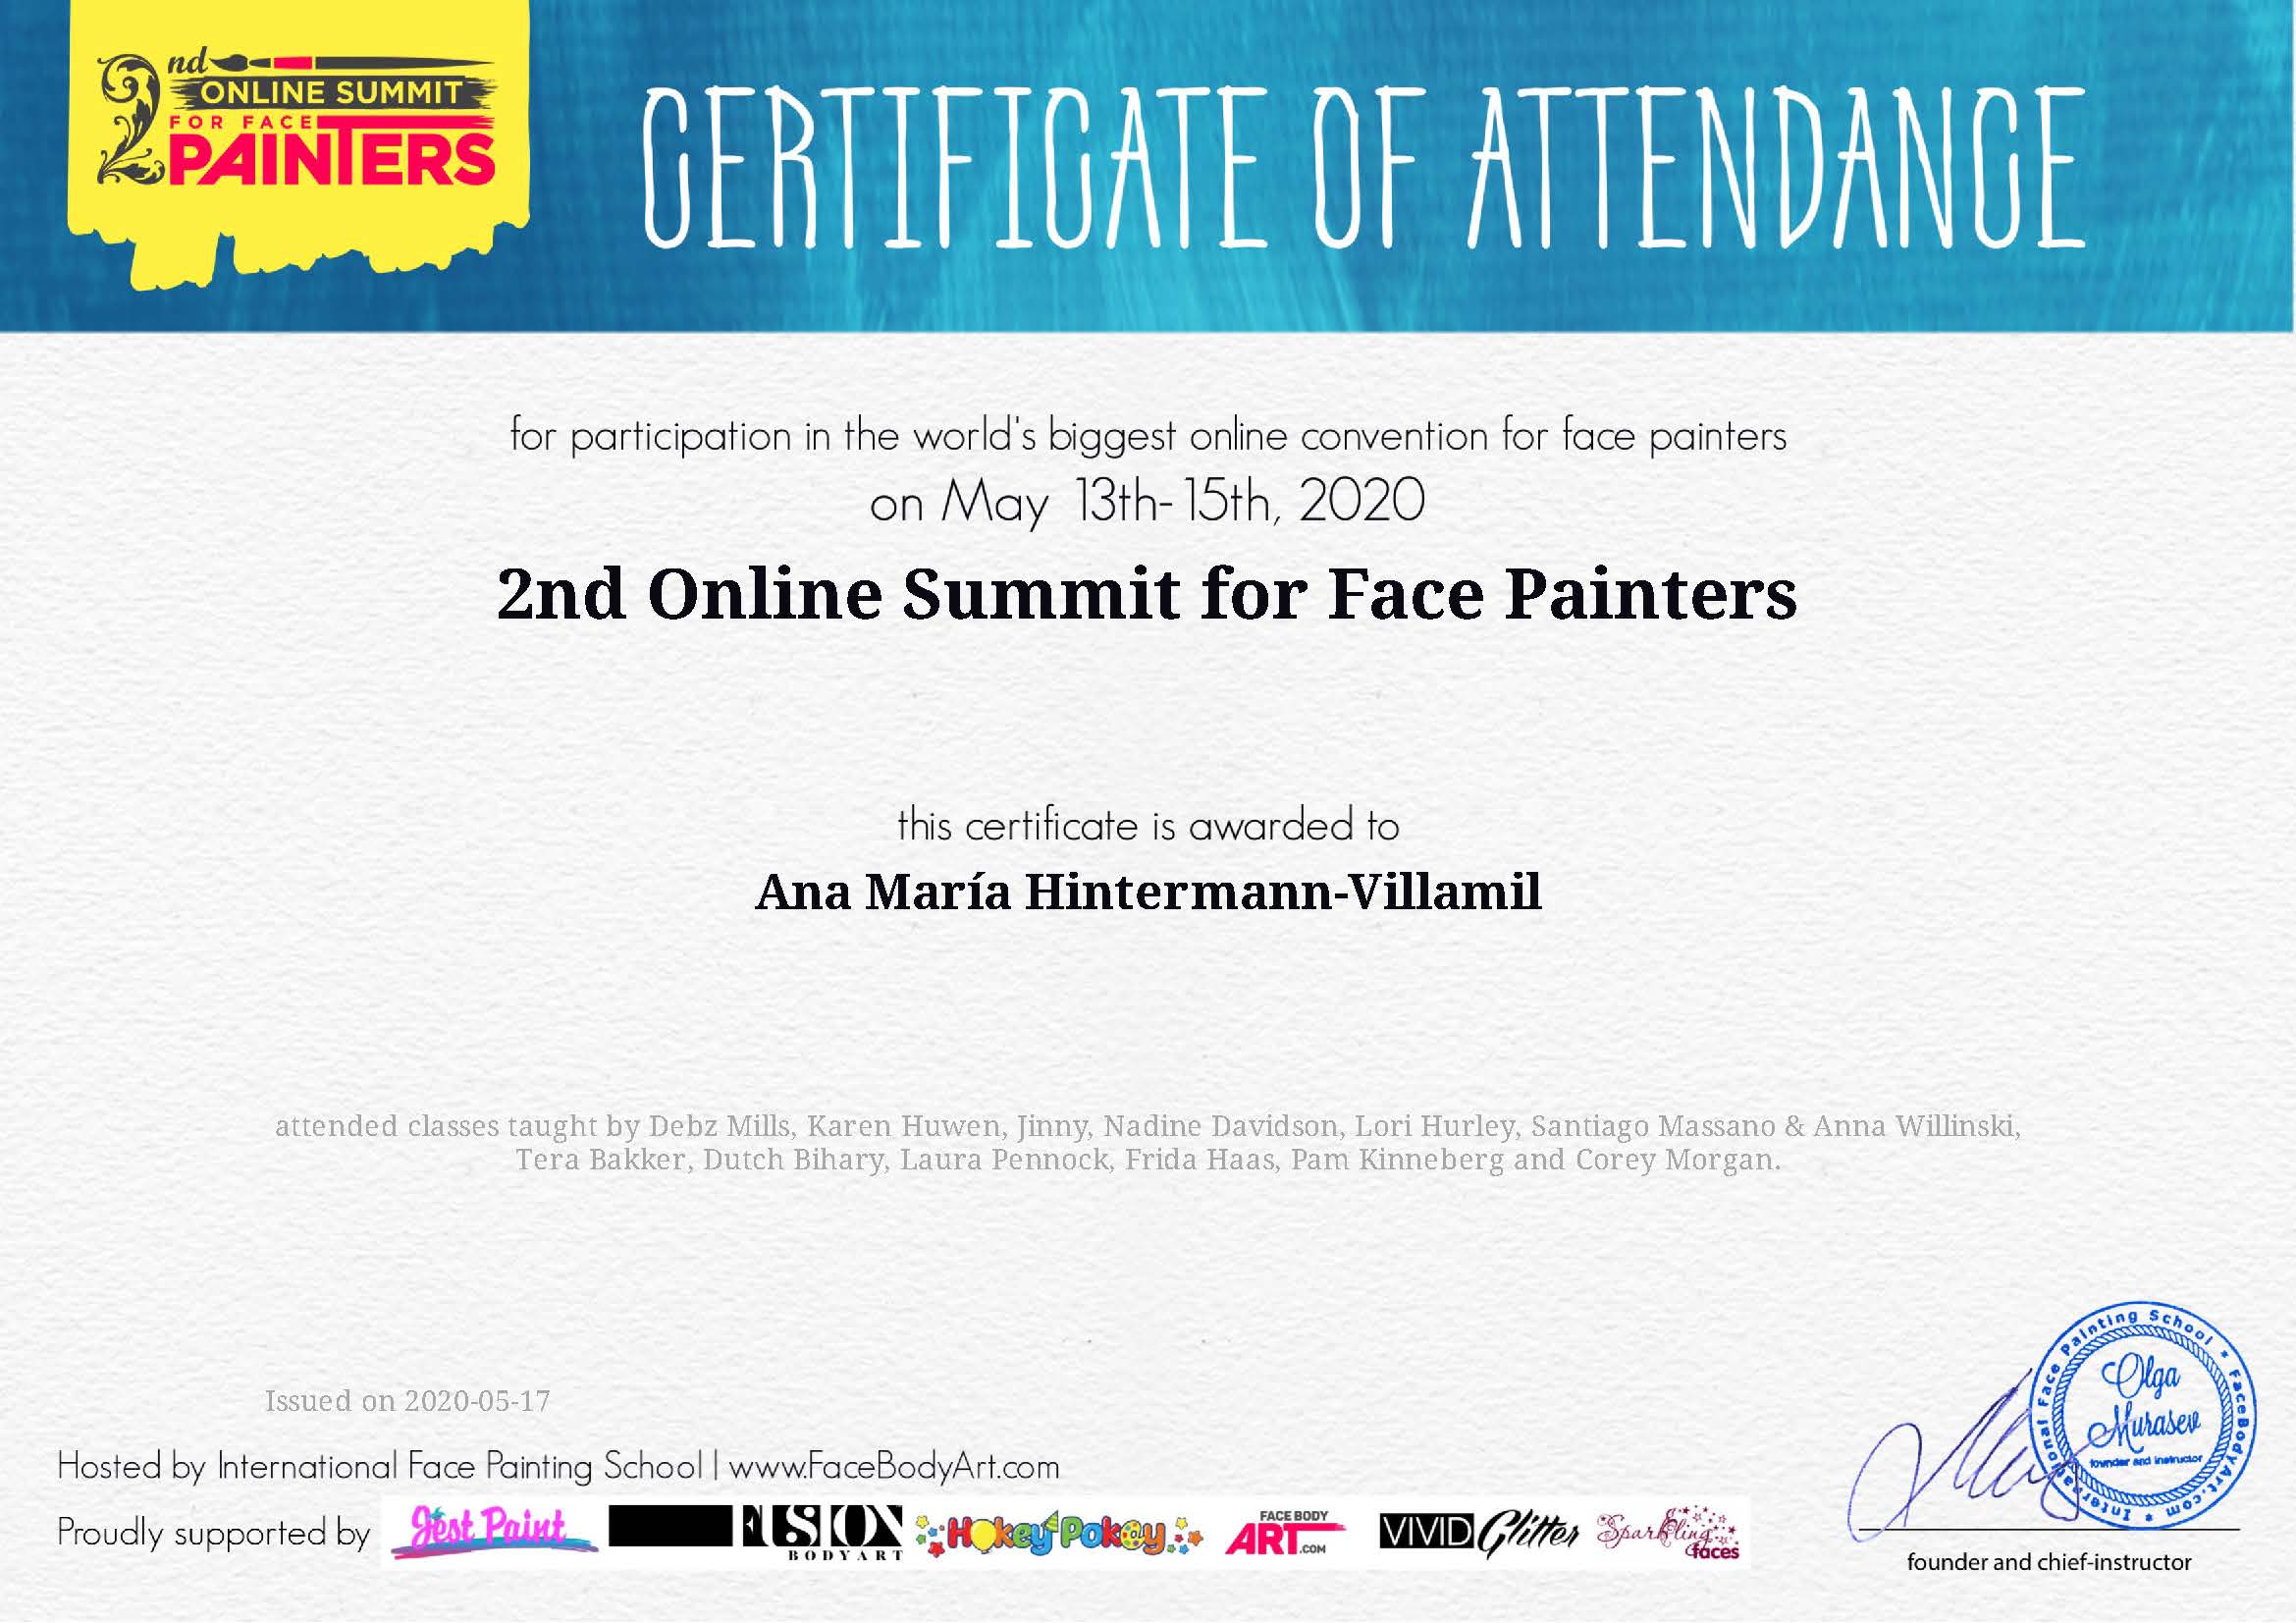 2nd Online Summit for Face Painters (2020)